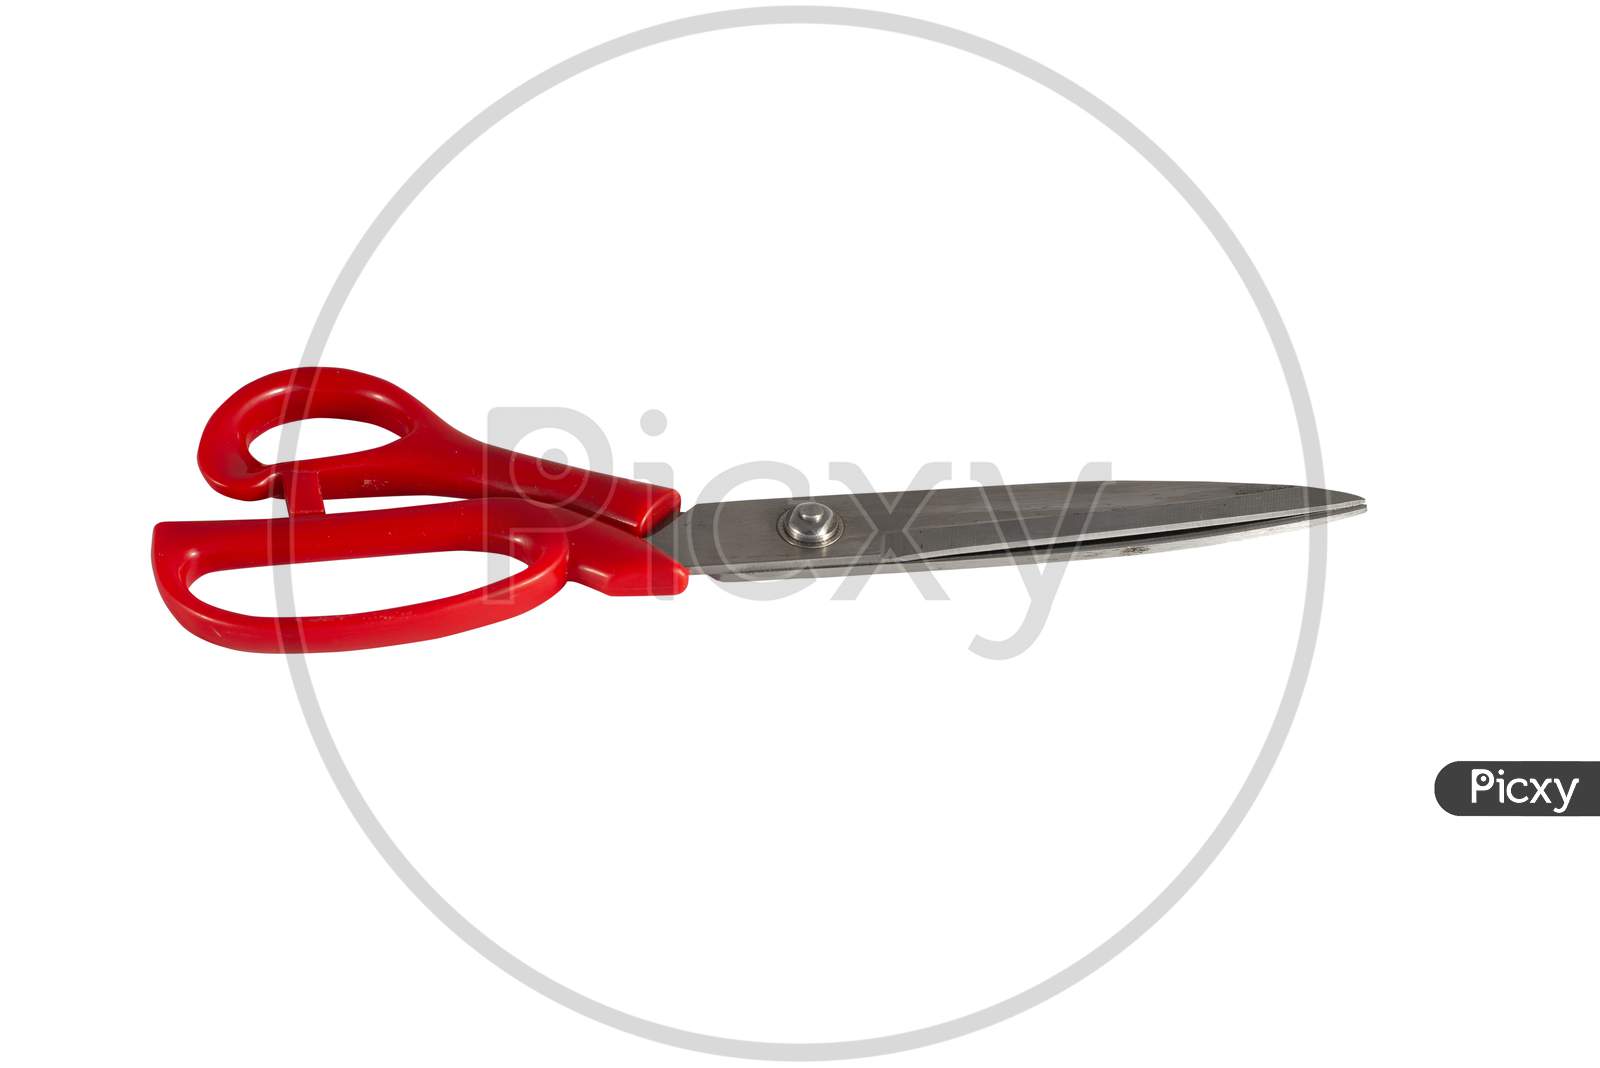 Scissors with red handle isolated on white background